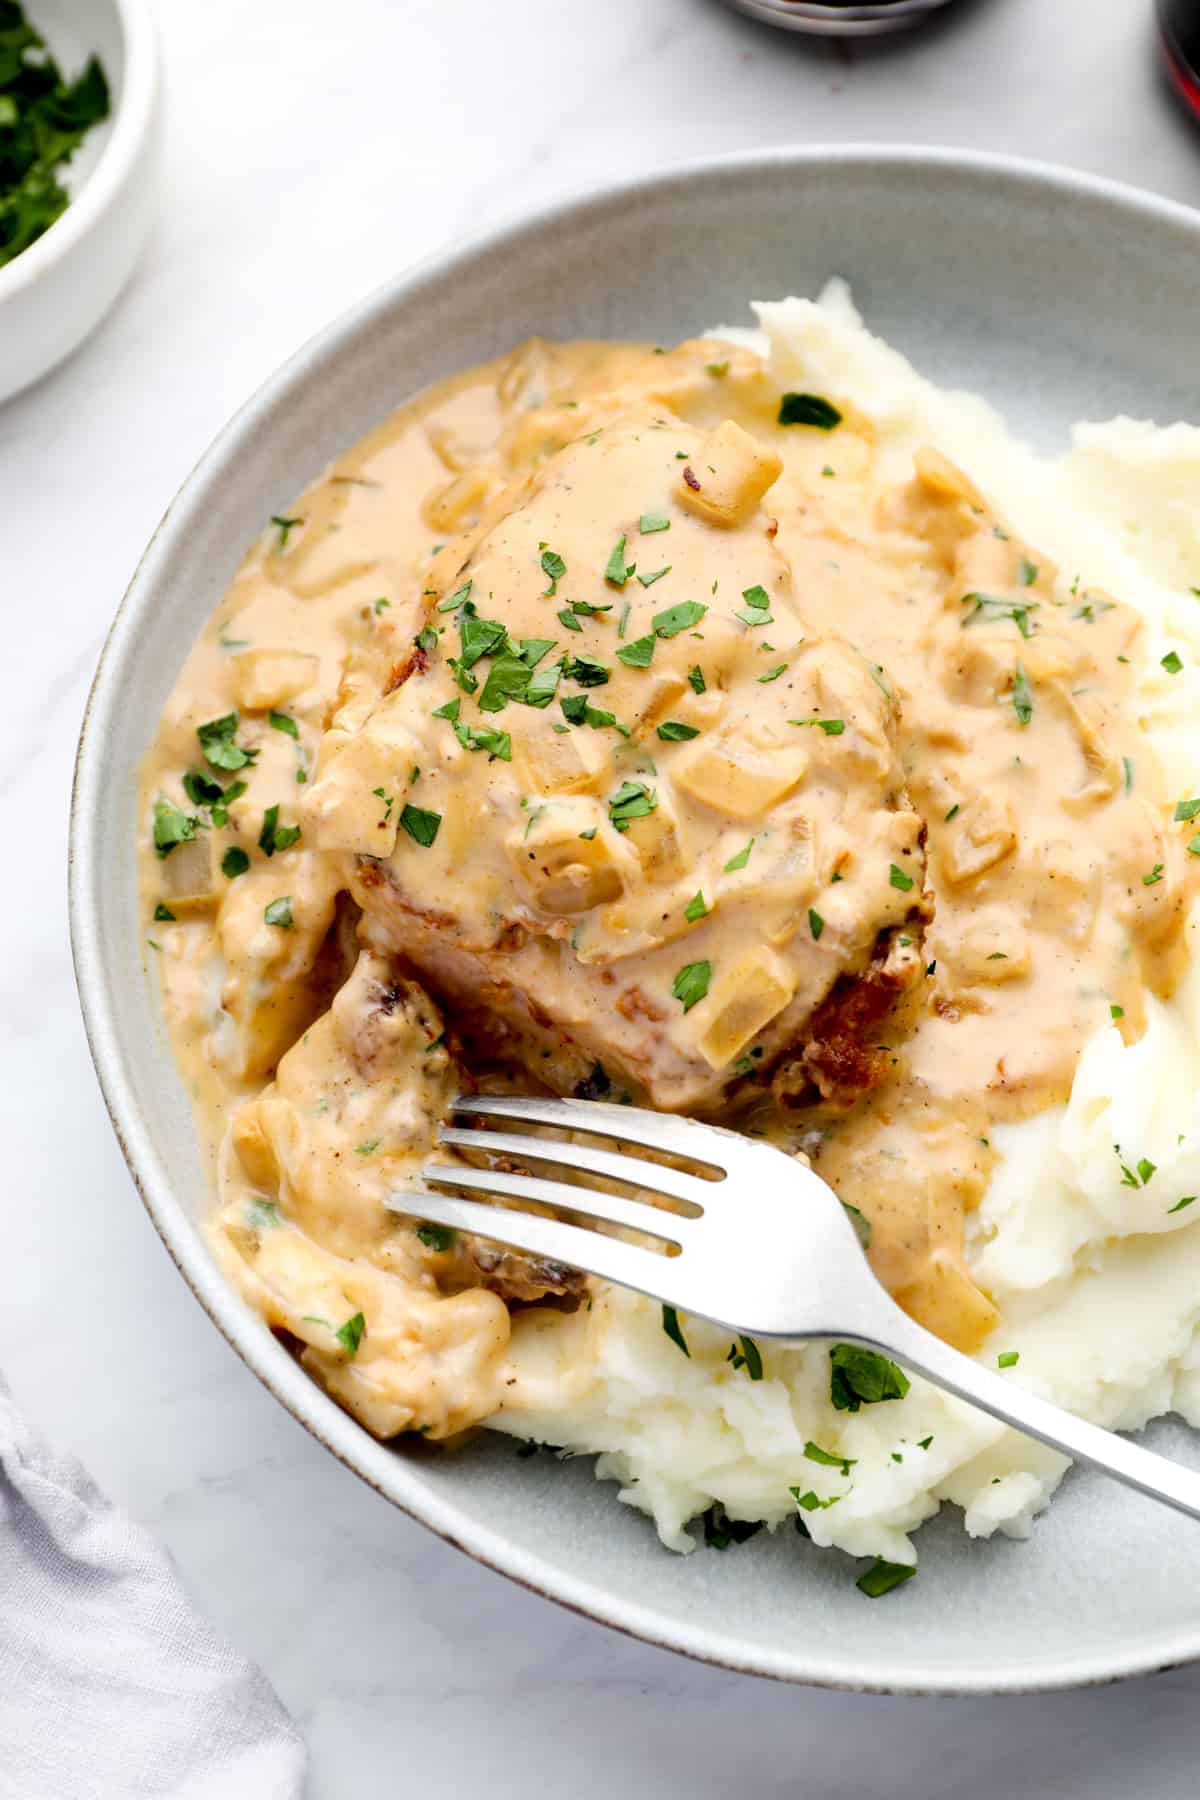 smothered pork chops in a bowl of mashed potatoes